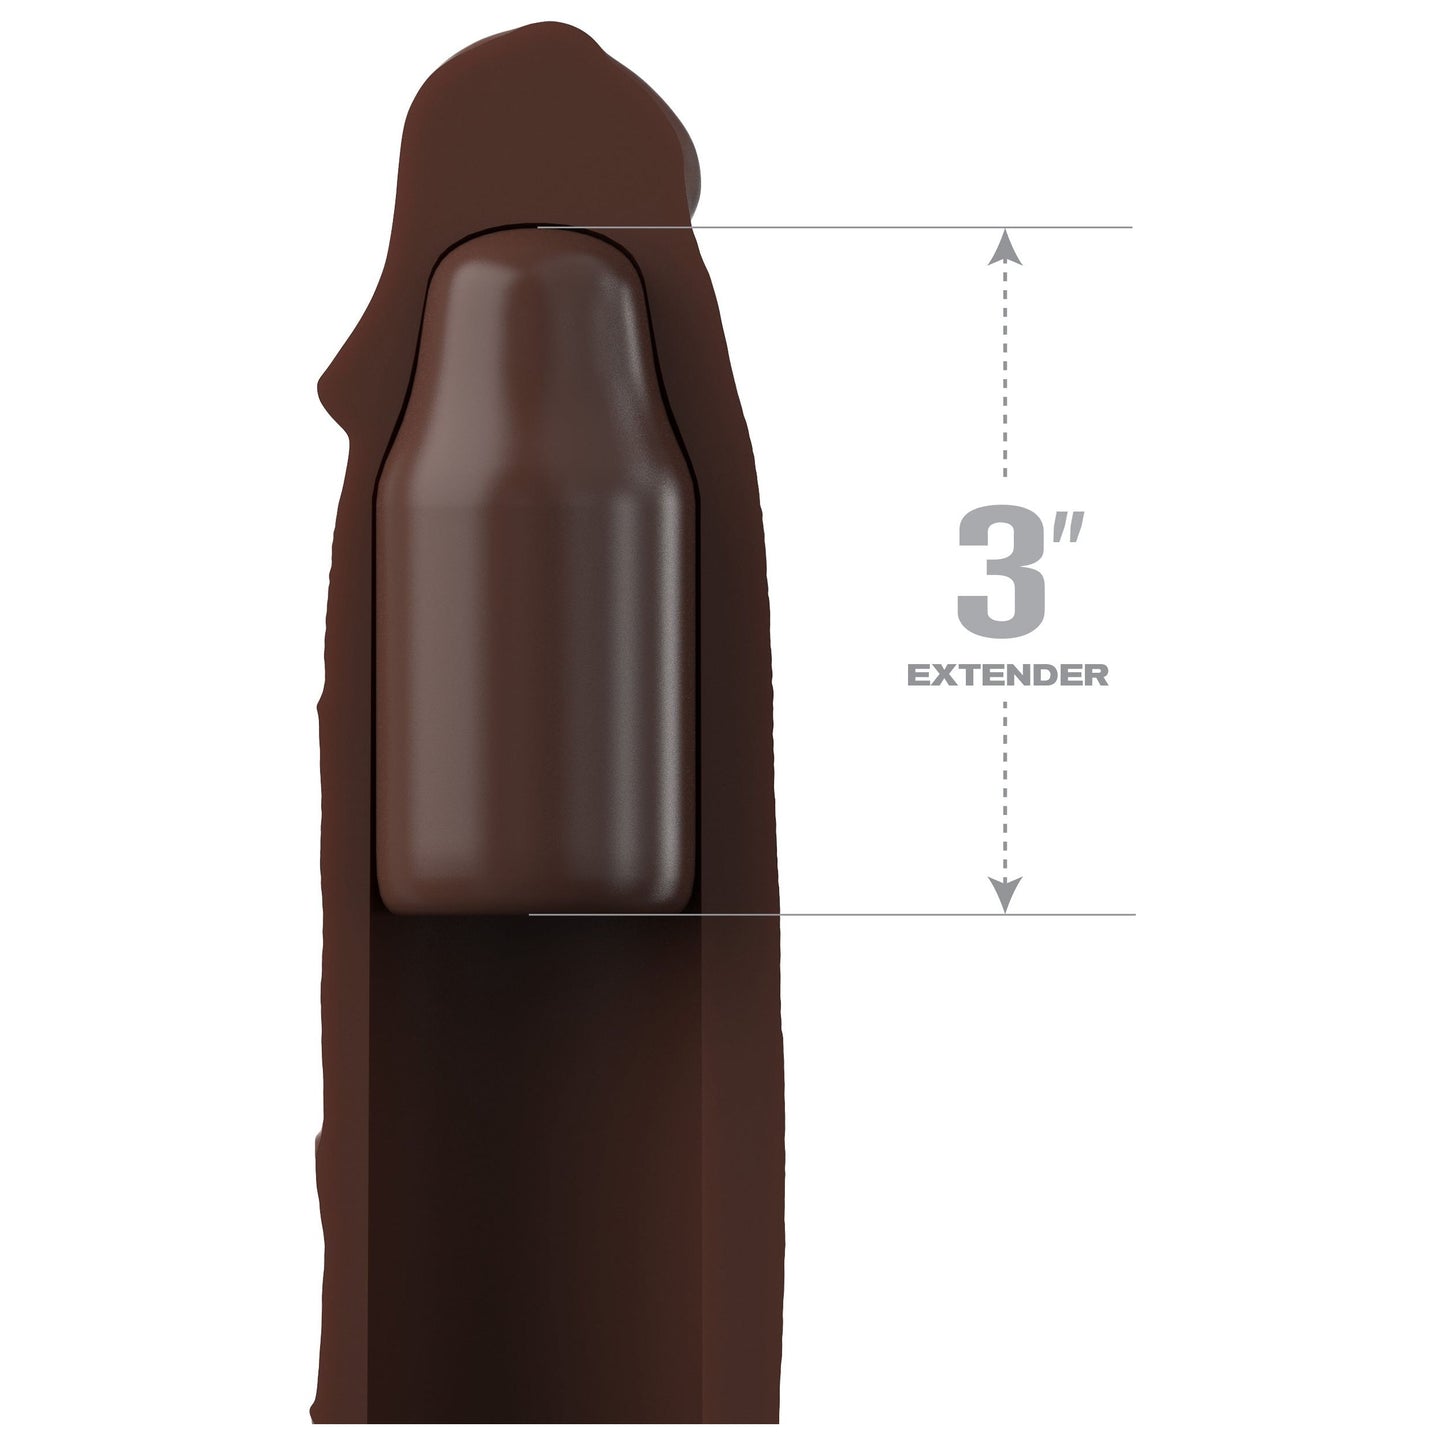 Fantasy X-Tensions Elite 3" Silicone Extension - Brown - My Temptations Adult Store